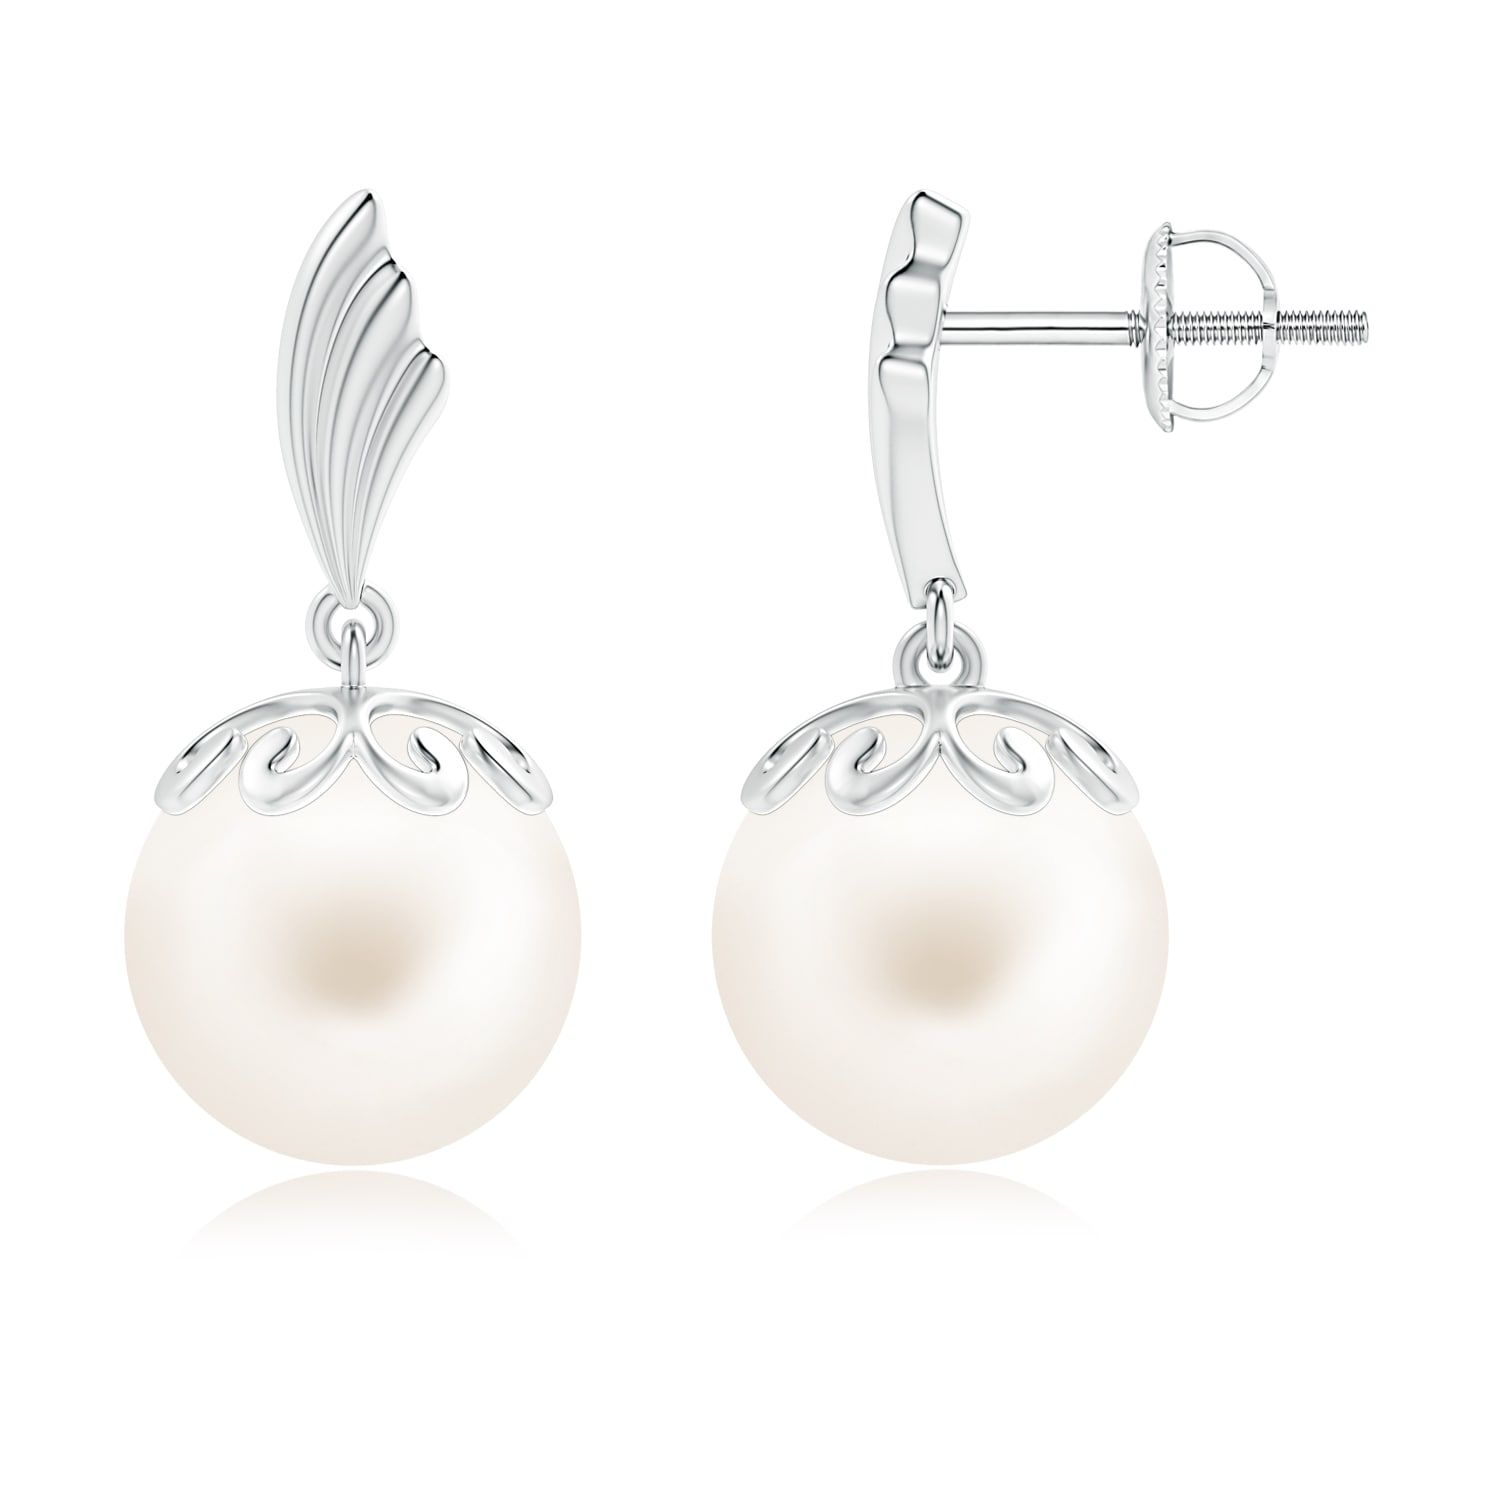 Freshwater Cultured Pearl Dangle Earrings With Wing Motif For Current Dangling Freshwater Cultured Pearl Rings (View 7 of 25)